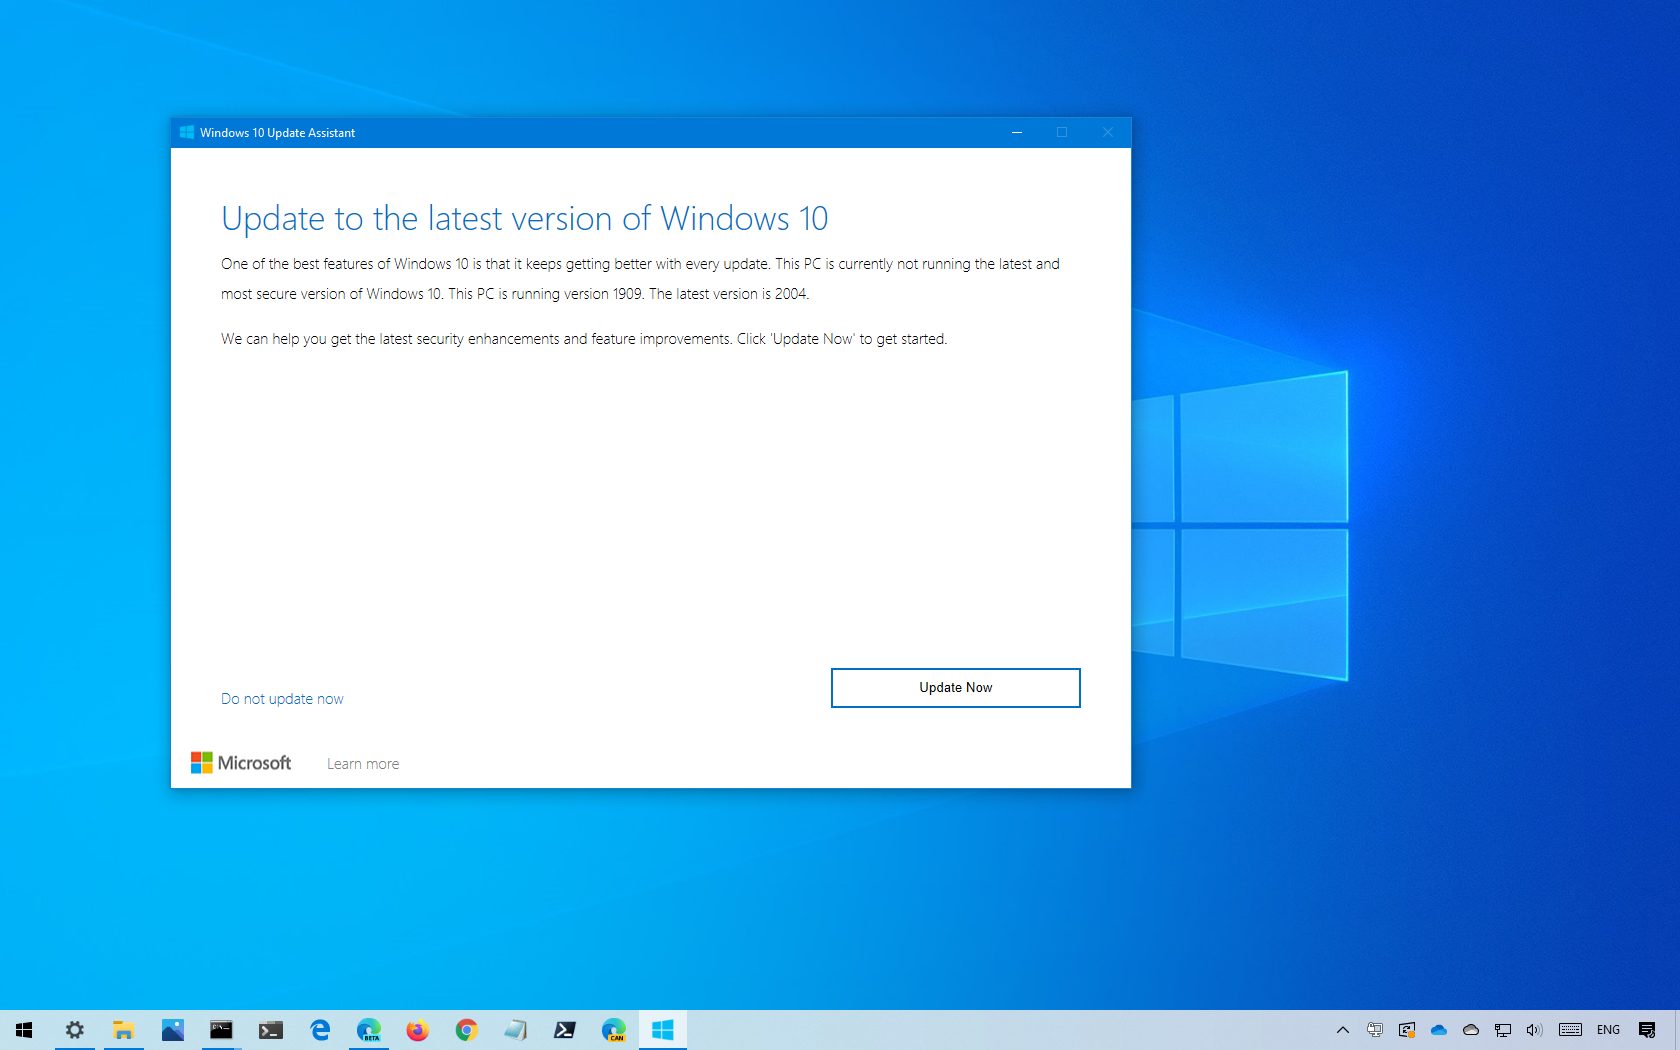 microsoft windows 10 download assistant